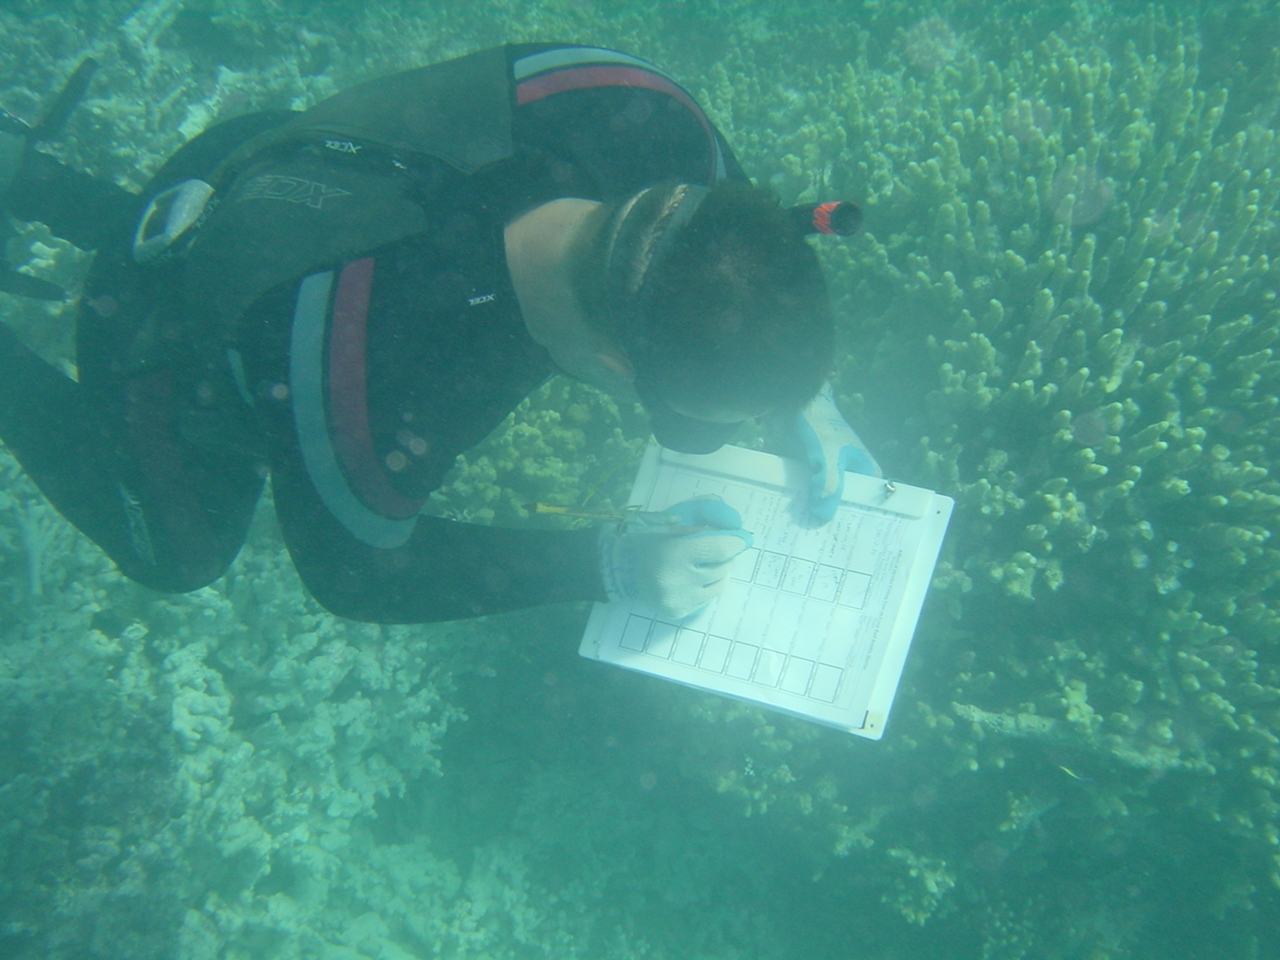 Scientist diver studying effects of derelict nets on coral reefs